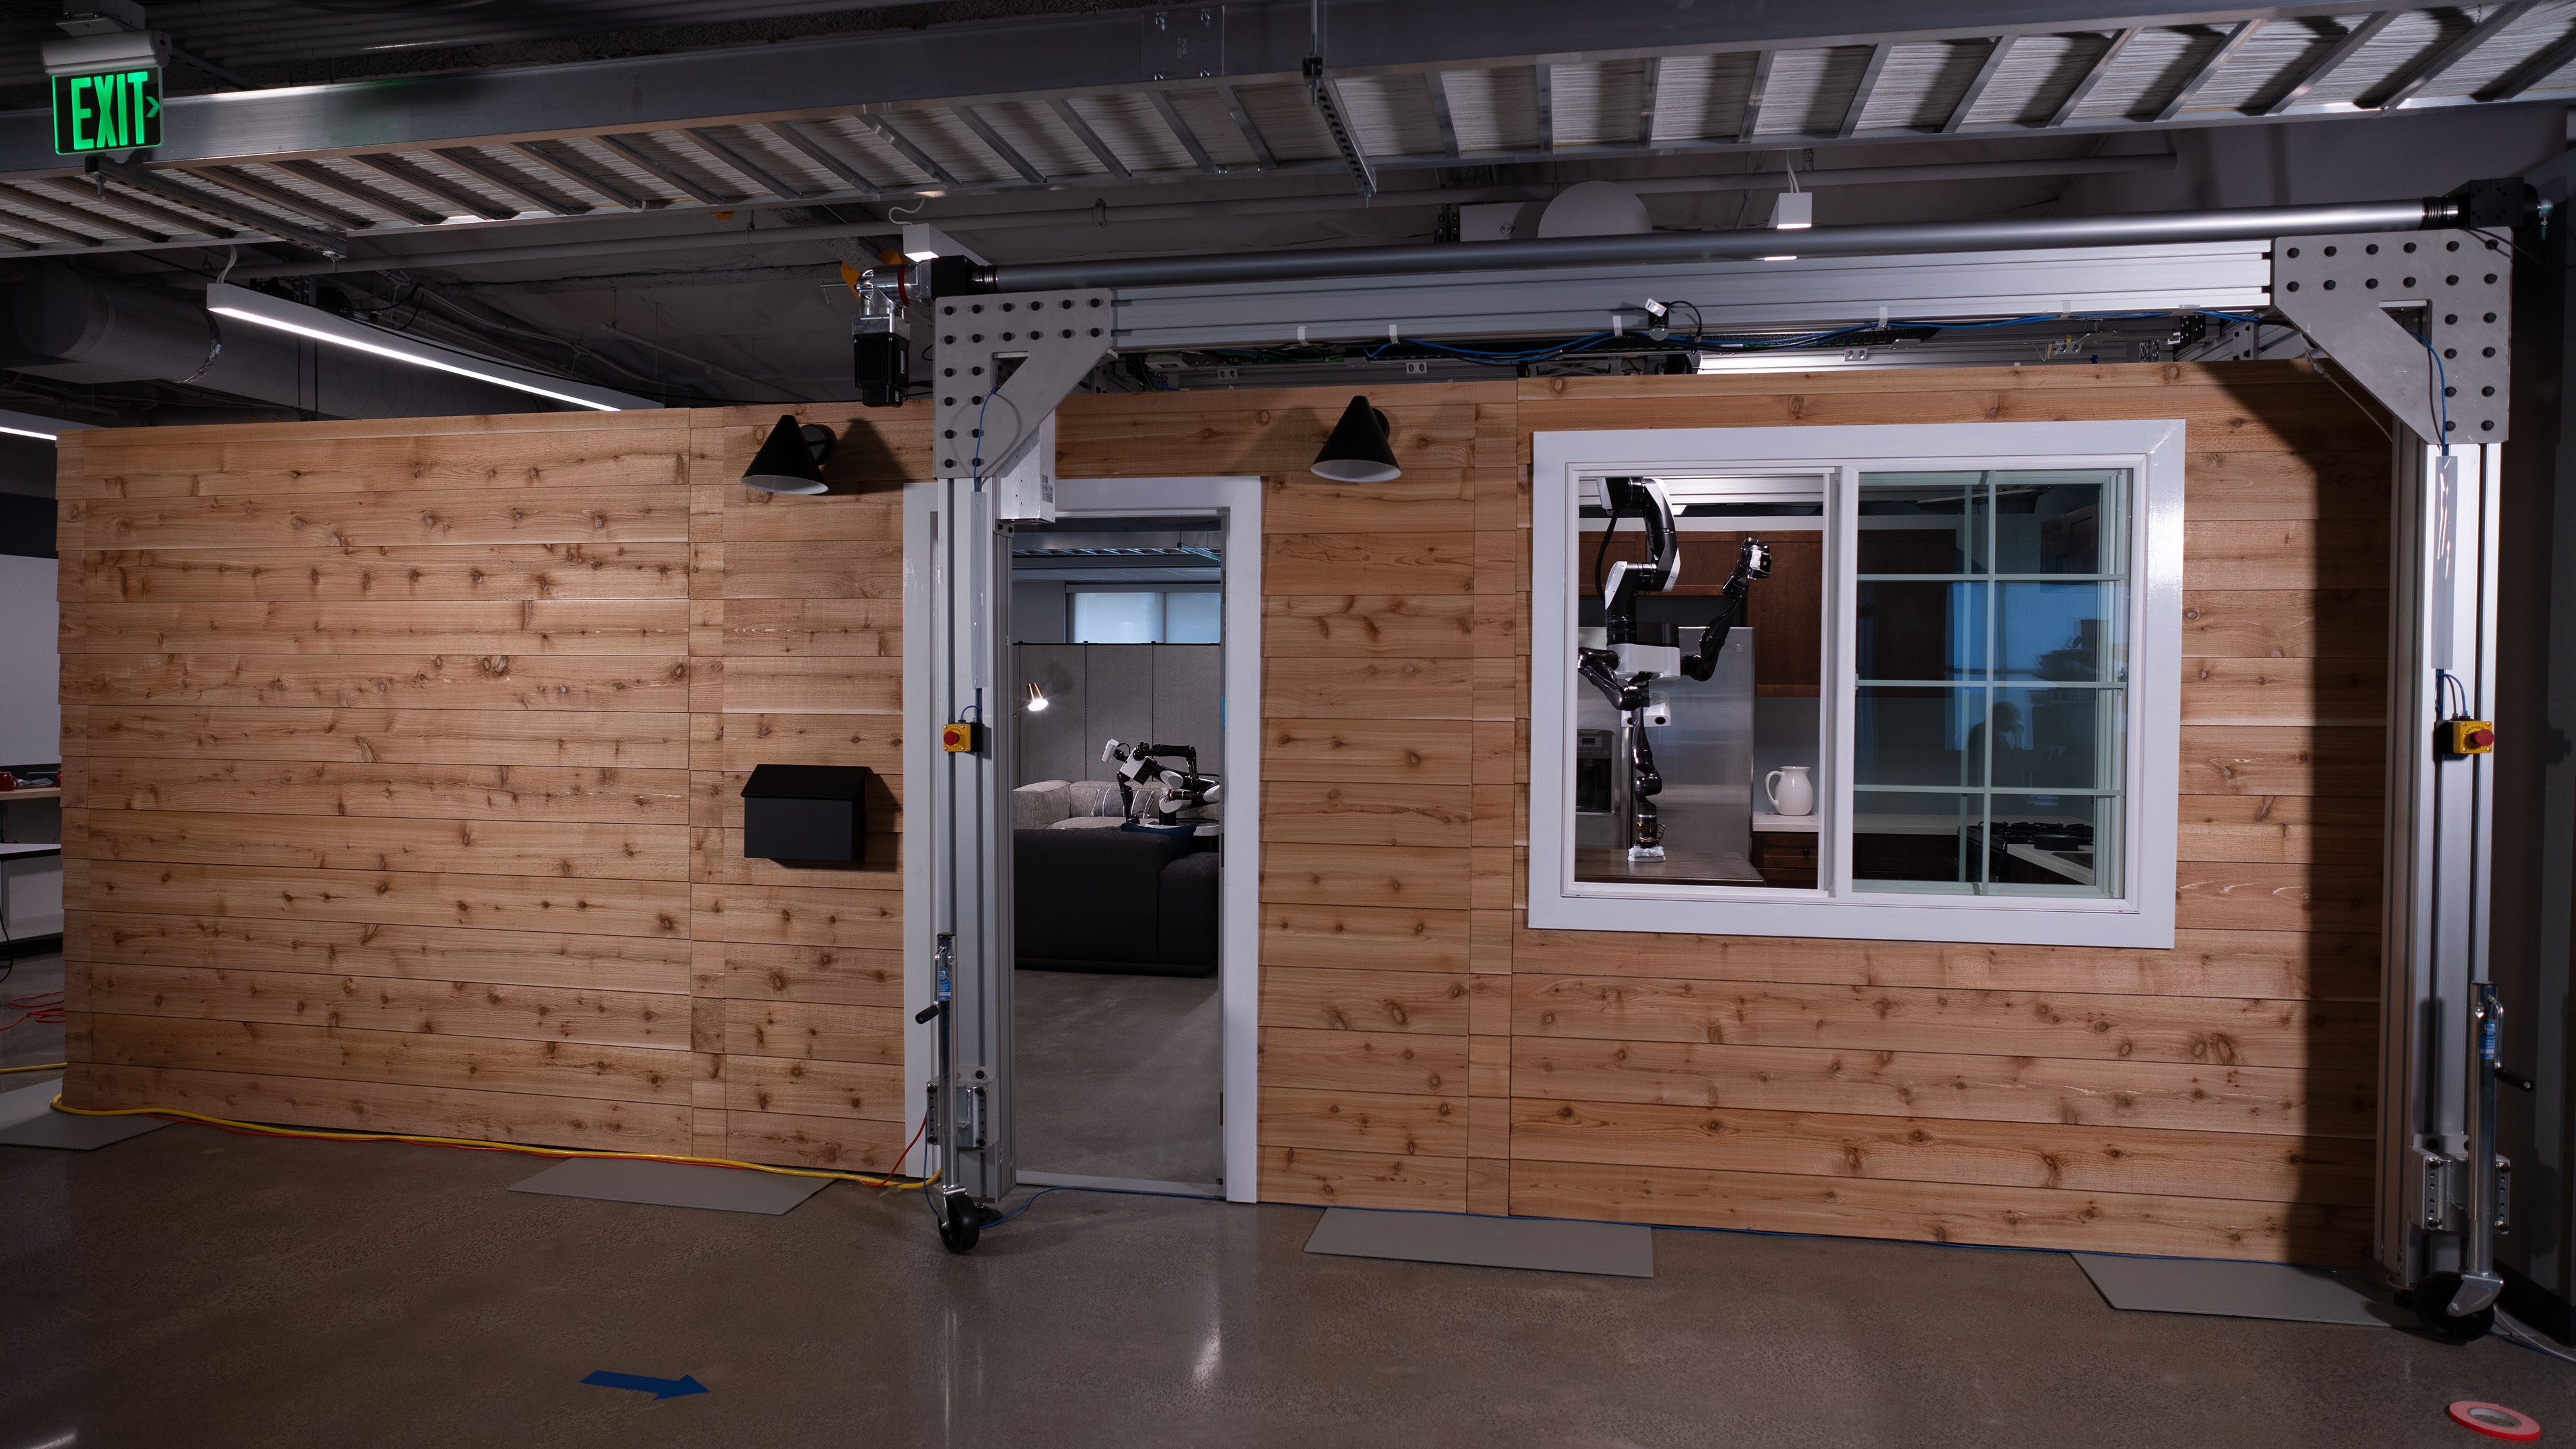 TRI has designed and built a mock home in their Los Altos, CA headquarters to accelerate research on various unique assistive robots